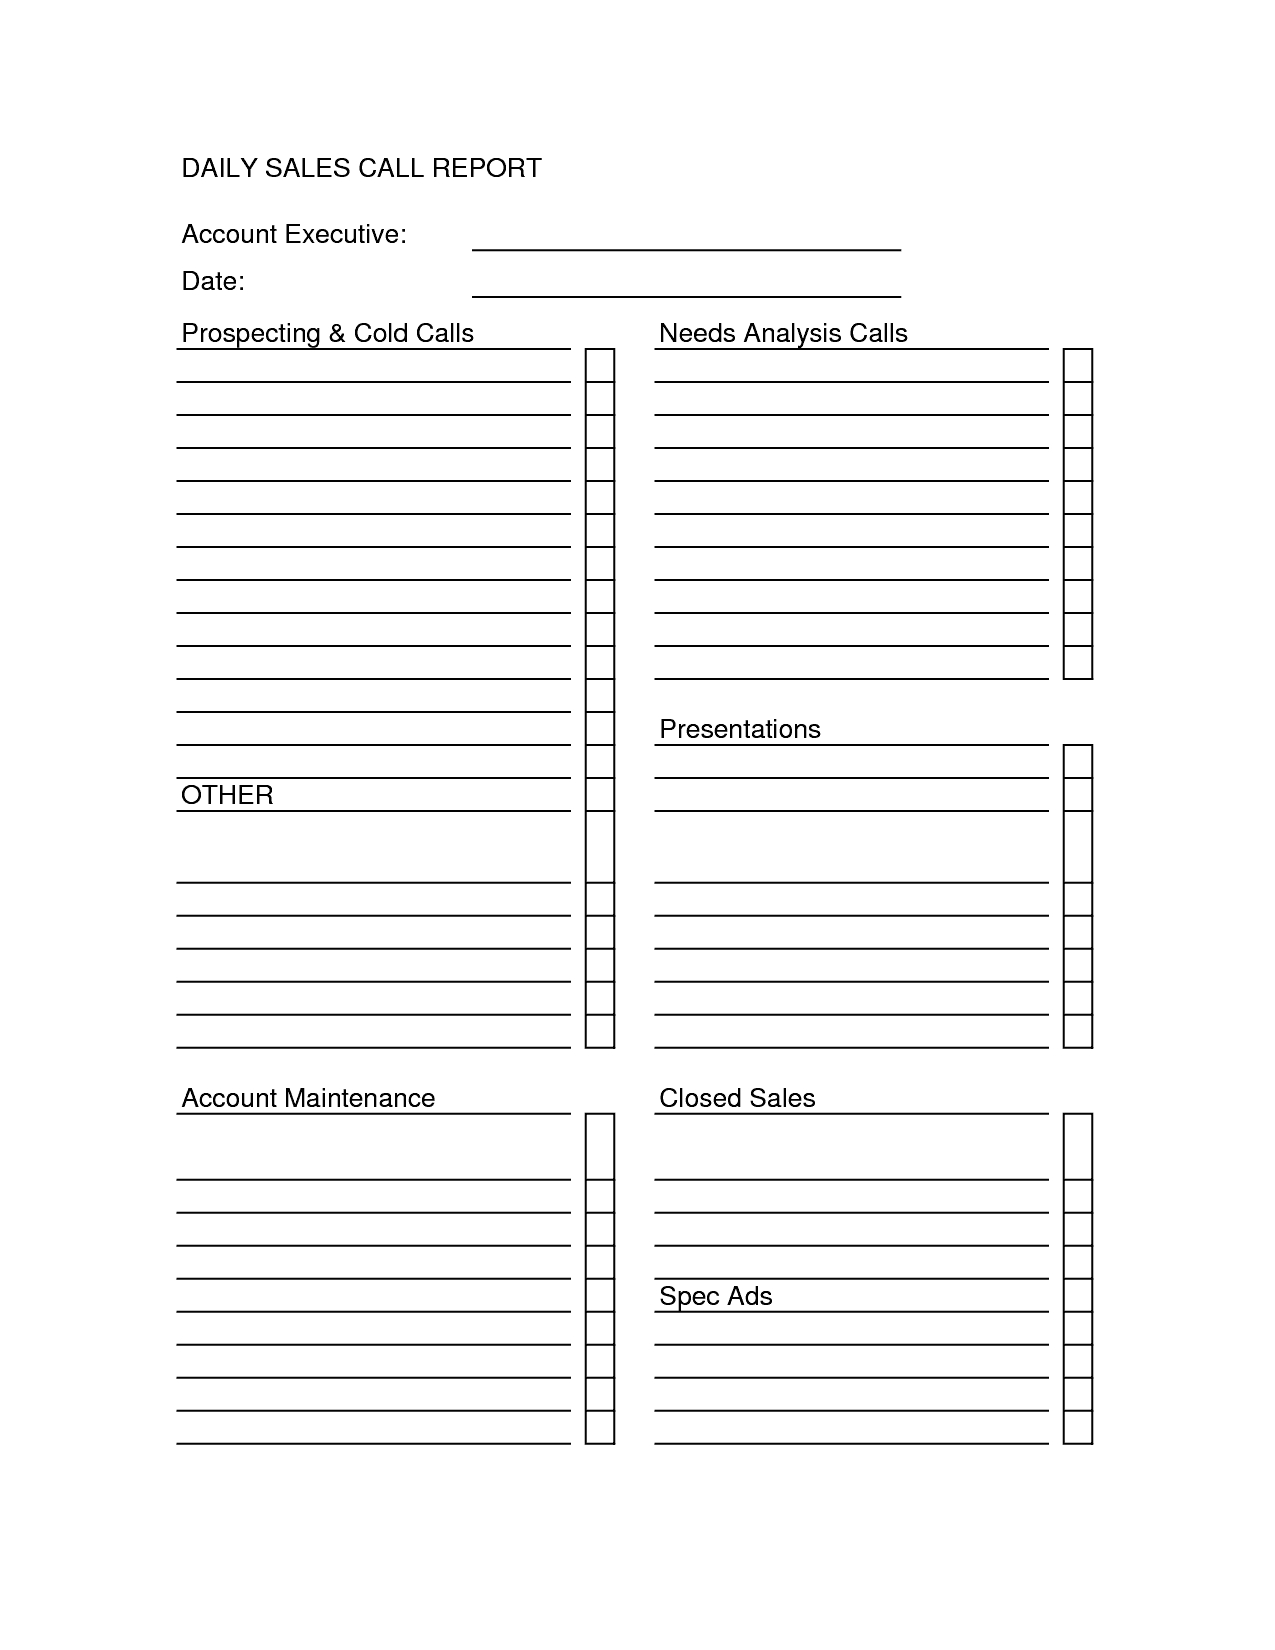 Sales Call Report Templates - Word Excel Fomats Pertaining To Sales Rep Call Report Template